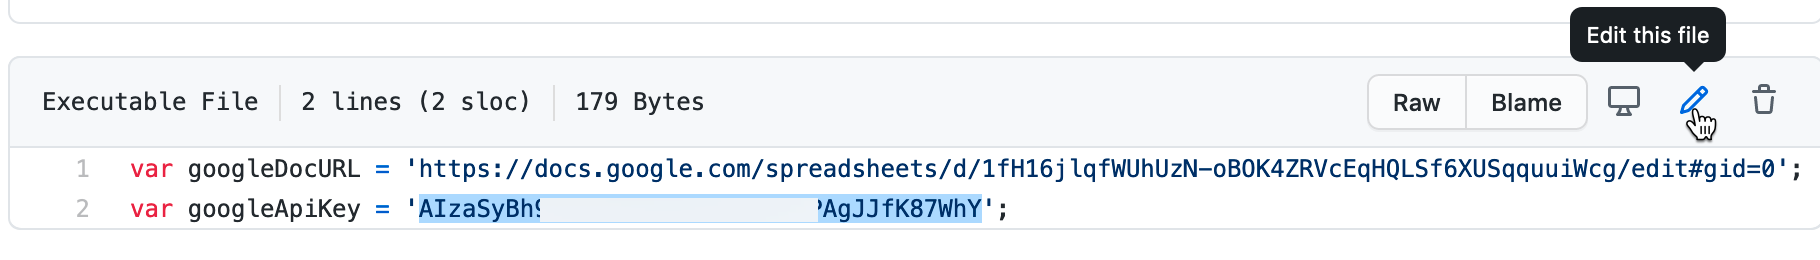 Paste in your Google Sheets API key to replace our key.